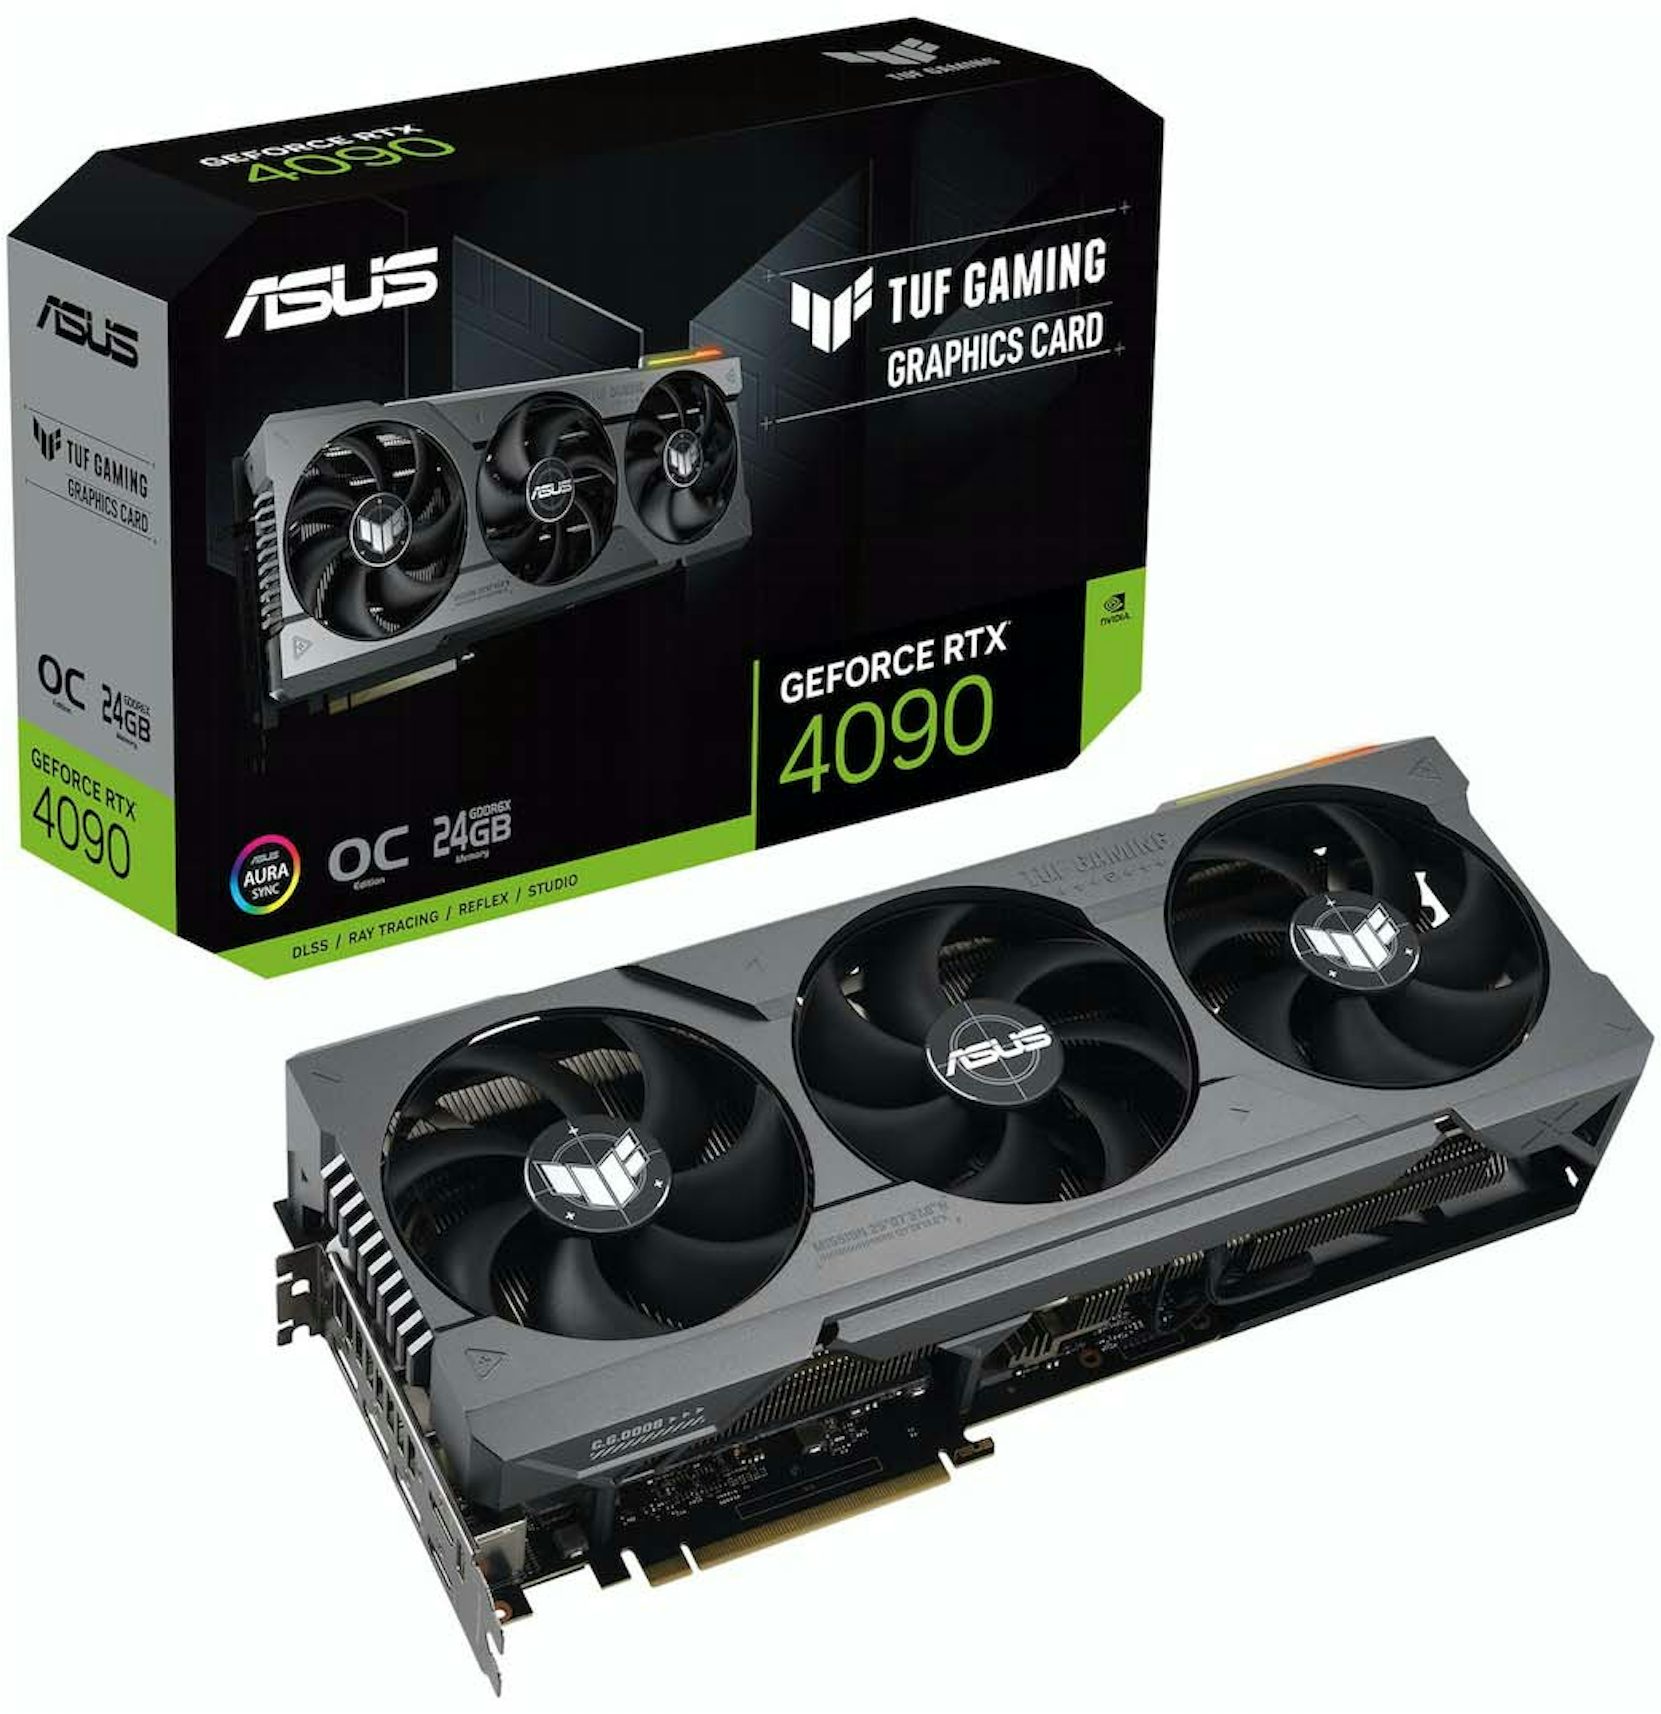 https://images.stockx.com/images/NVIDIA-ASUS-TUF-Gaming-GeForce-RTX-4090-24G-OC-Graphics-Card-90YV0IE0-M0NA00.jpg?fit=fill&bg=FFFFFF&w=1200&h=857&fm=jpg&auto=compress&dpr=2&trim=color&updated_at=1666372204&q=60